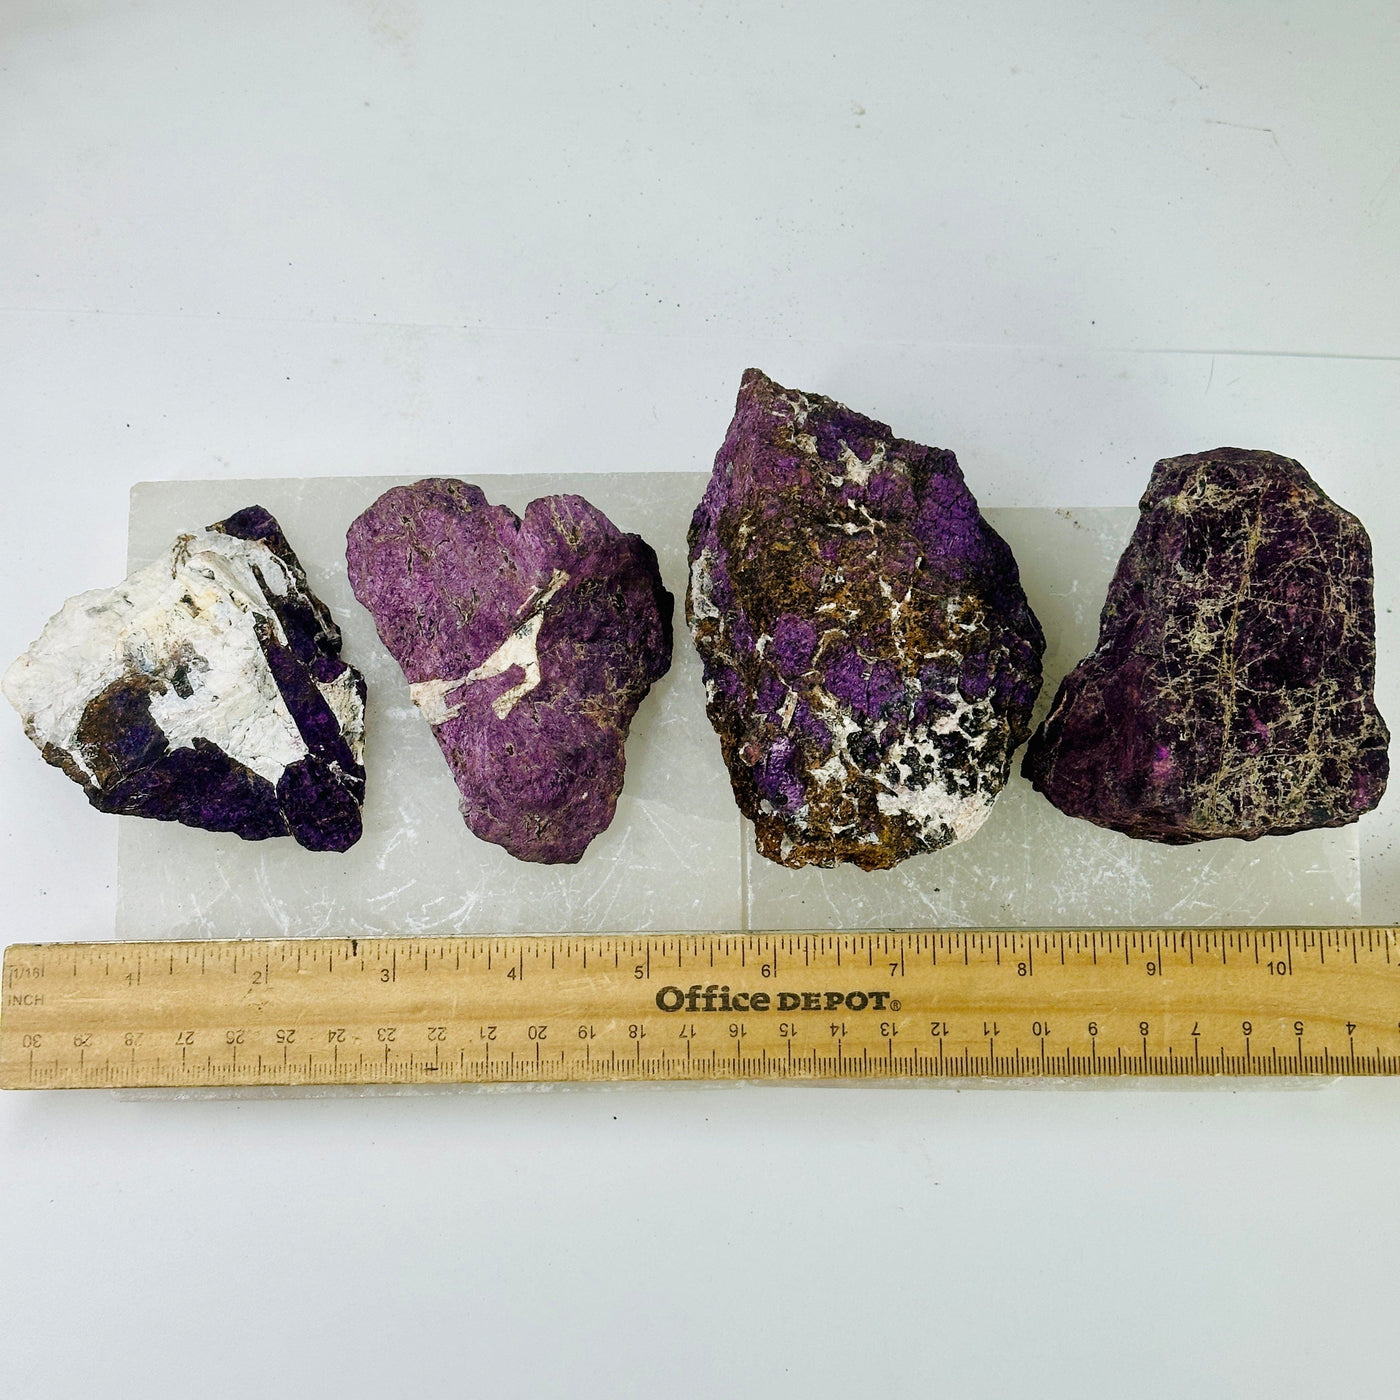  Purpurite Crystal - Natural Rough Stone - OOAK - YOU CHOOSE all variants with ruler for size reference